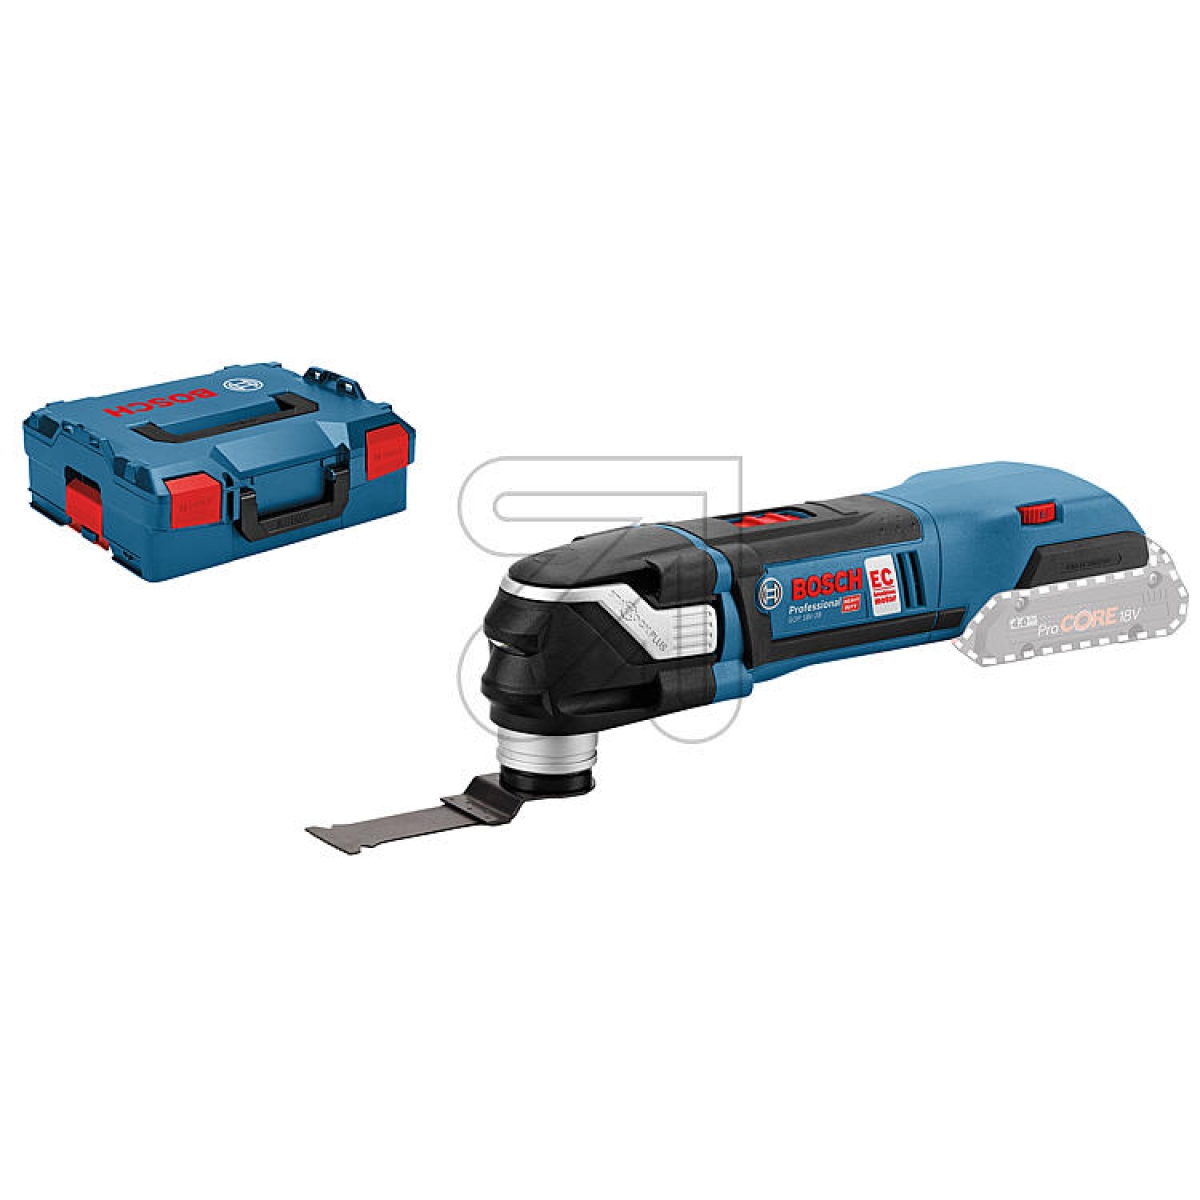 BoschGOP 18V-28 cordless multi-cutter with saw bladeArticle-No: 756155